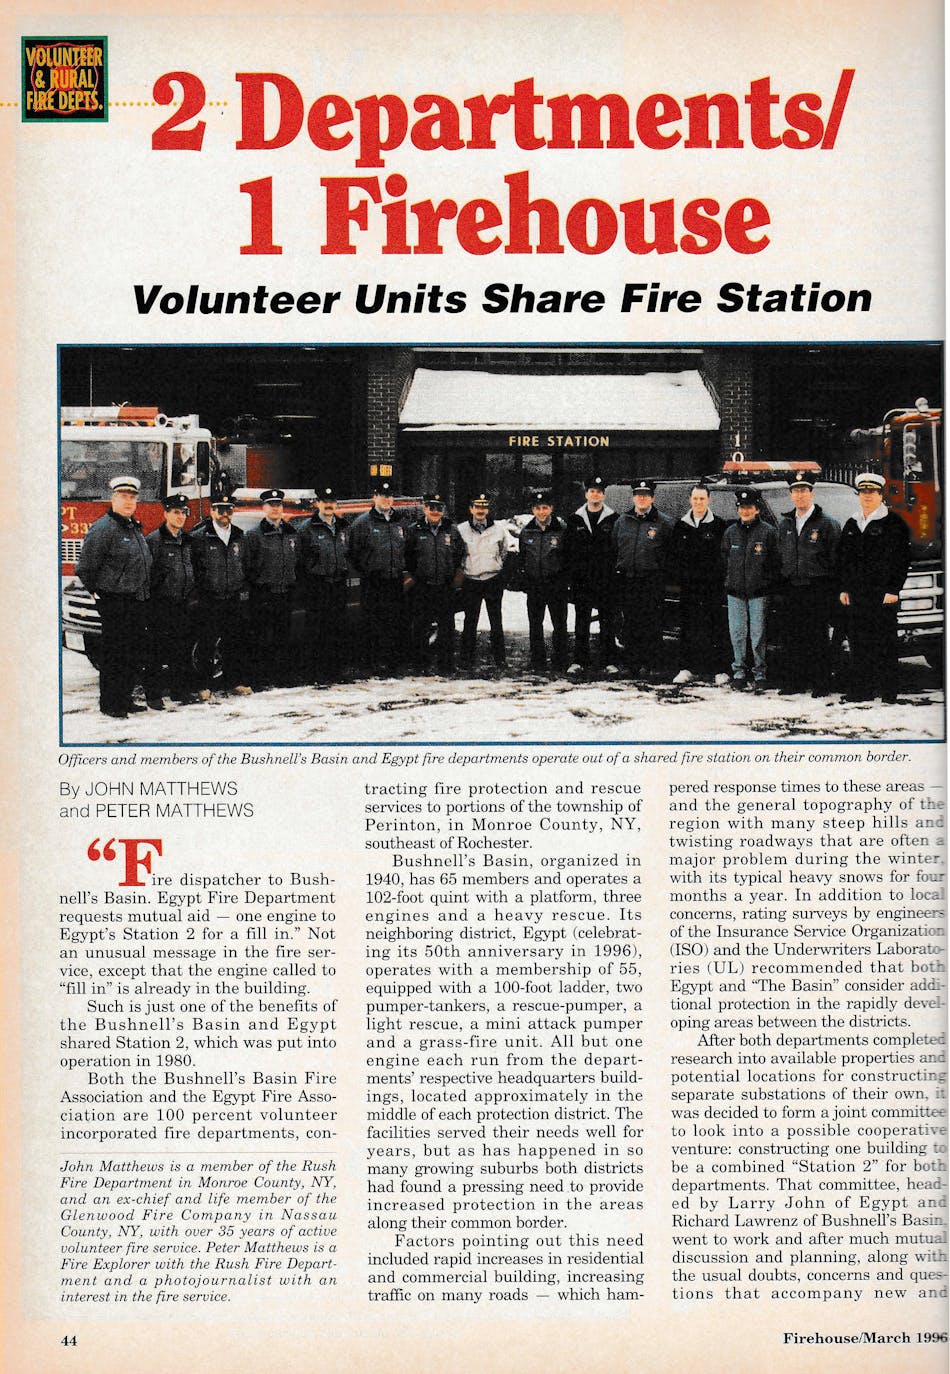 My father, John Matthews, pitched a story about two fire departments that shared a fire station in upstate New York. We visited the Bushnell&rsquo;s Basin/Egypt firehouse, interviewed the members and took some photos, and the article &ldquo;2 Fire Departments/1 Station&rdquo; ran in the March 1996 issue.